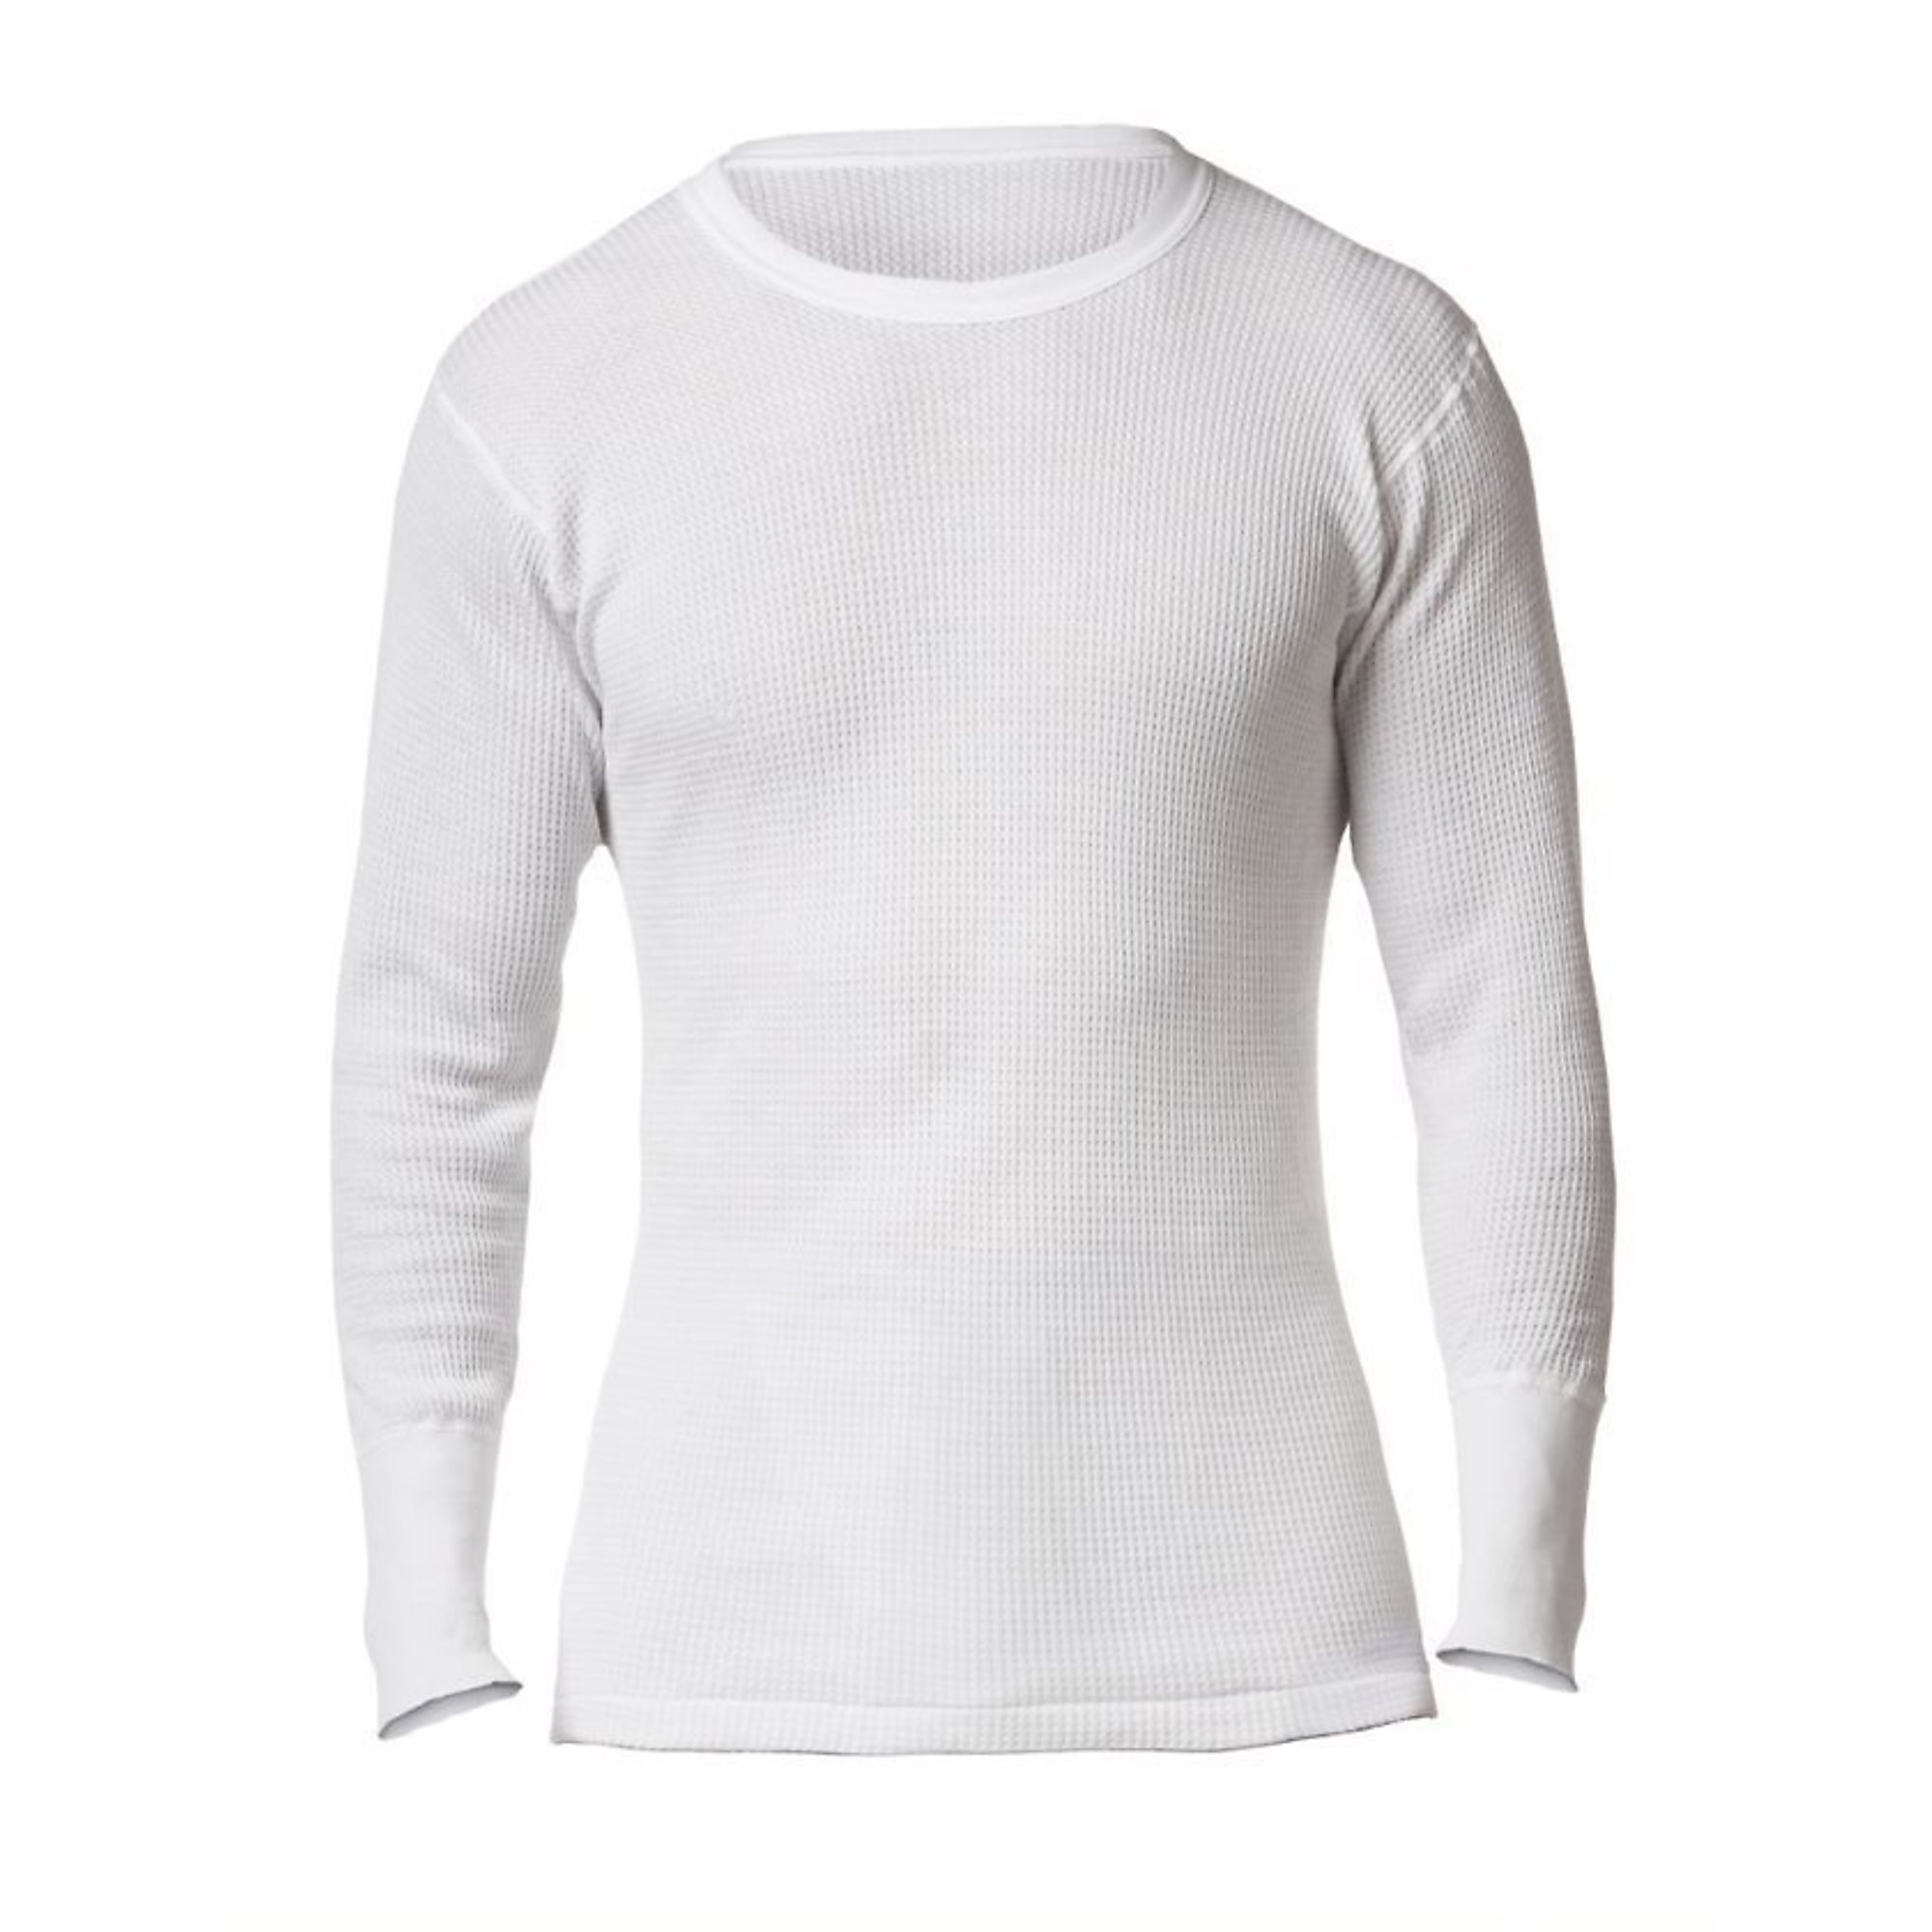 DT118 District? - Young Mens Long Sleeve Thermal